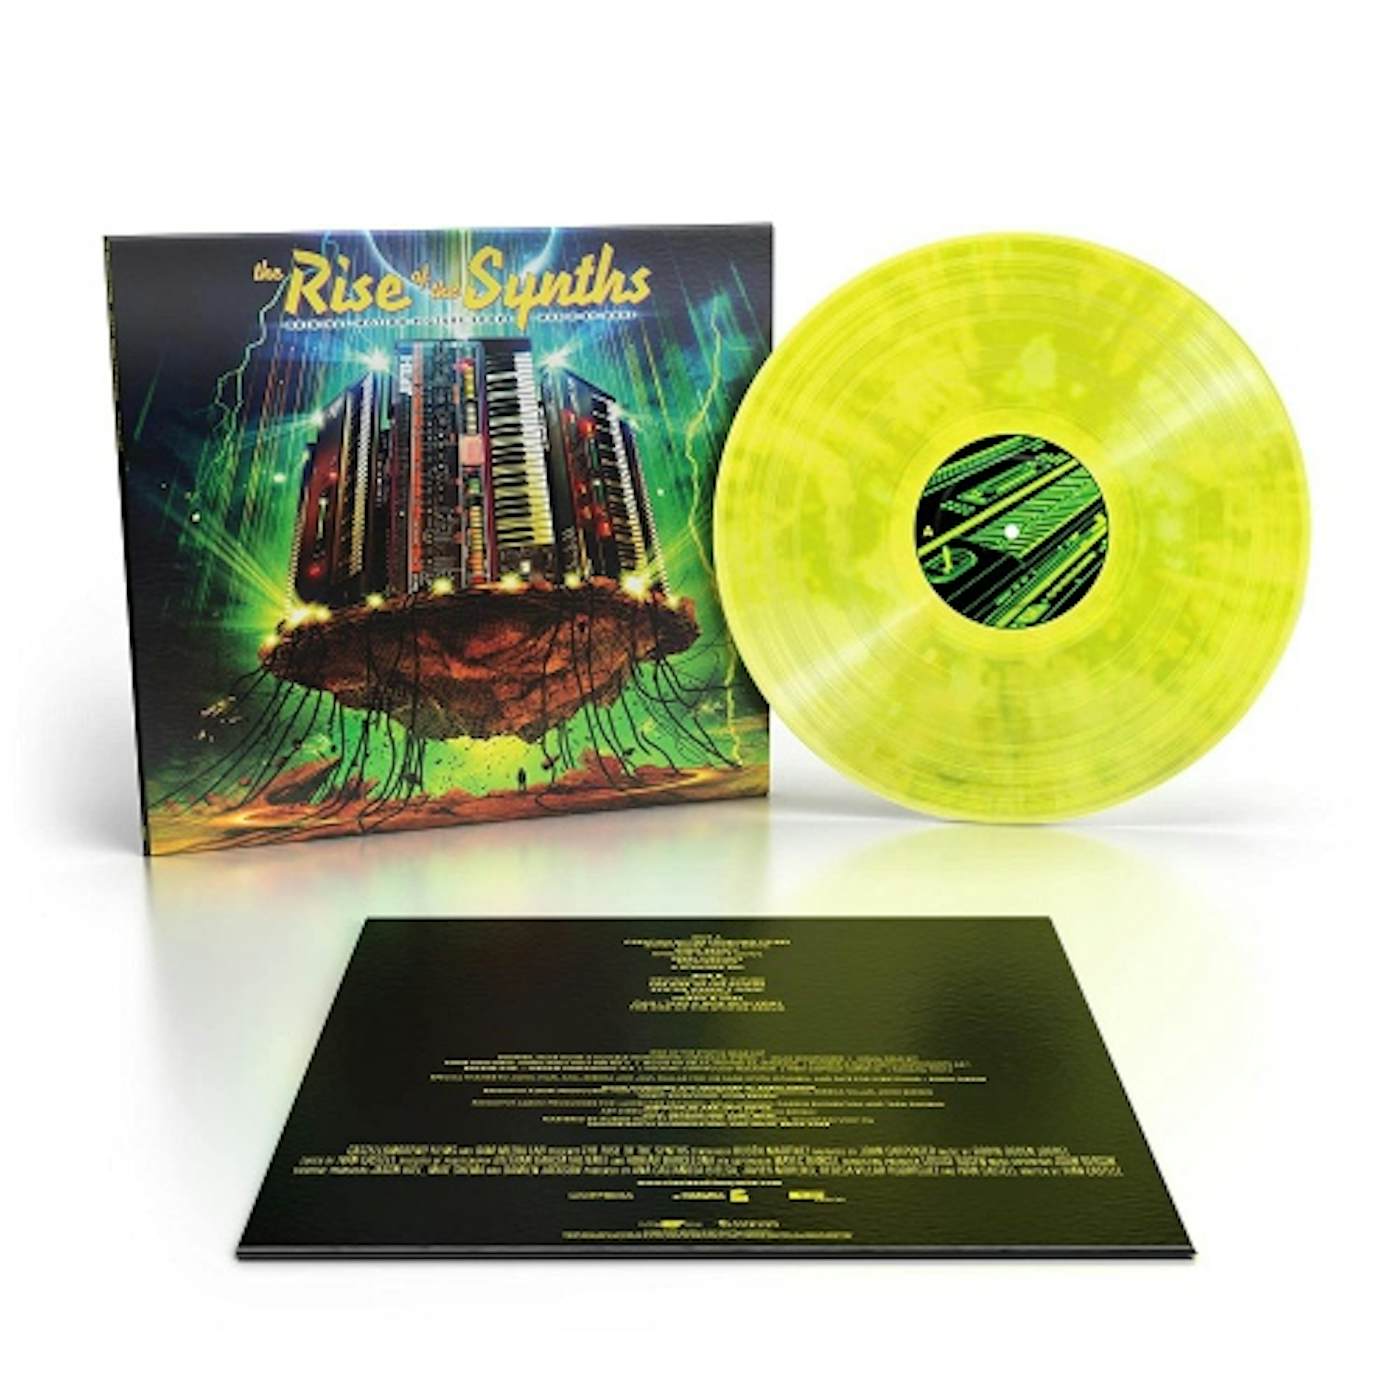 OGRE Sound RISE OF THE SYNTHS Original Soundtrack Vinyl Record